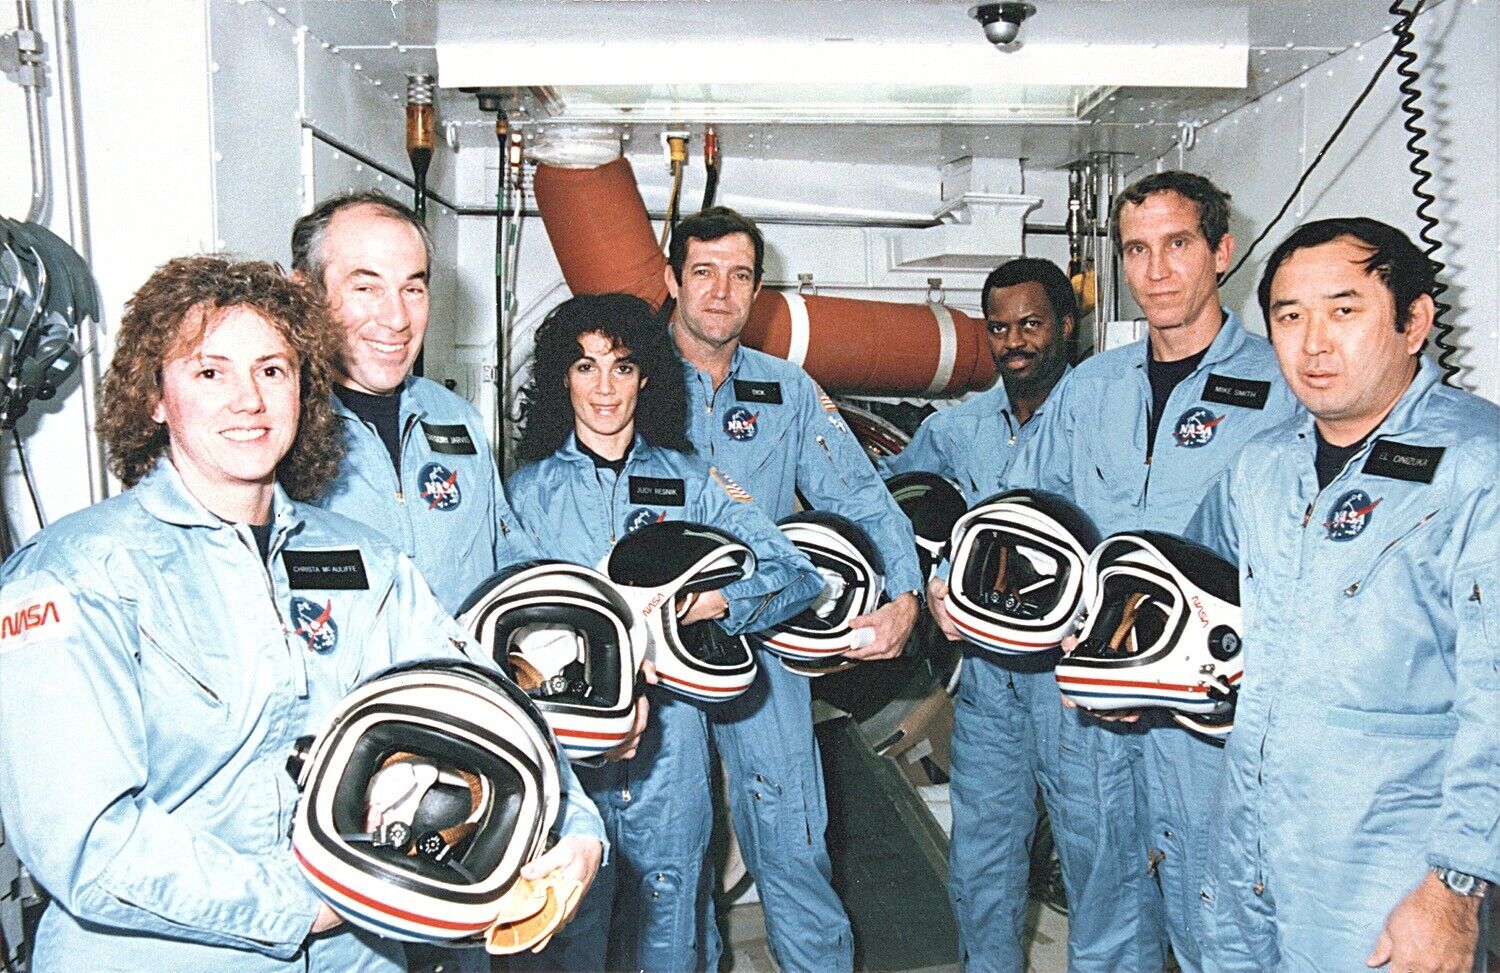 Last Space Shuttle Challenger Crew PHOTO,NASA Art Print,Disaster Mission STS-51L